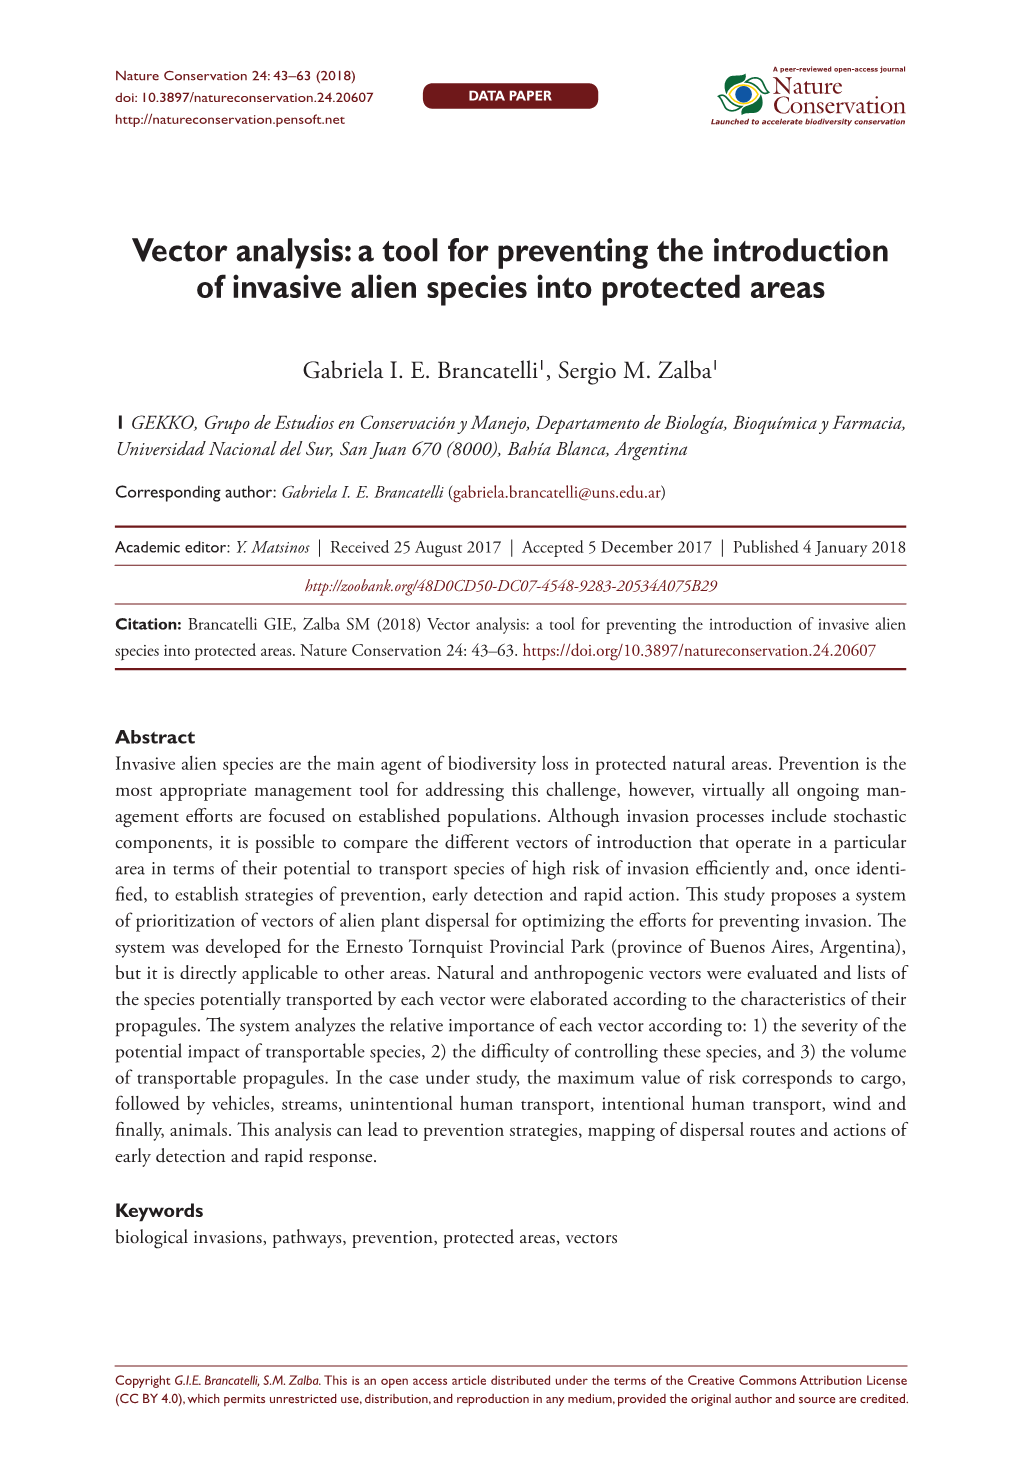 A Tool for Preventing the Introduction of Invasive Alien Species Into Protected Areas